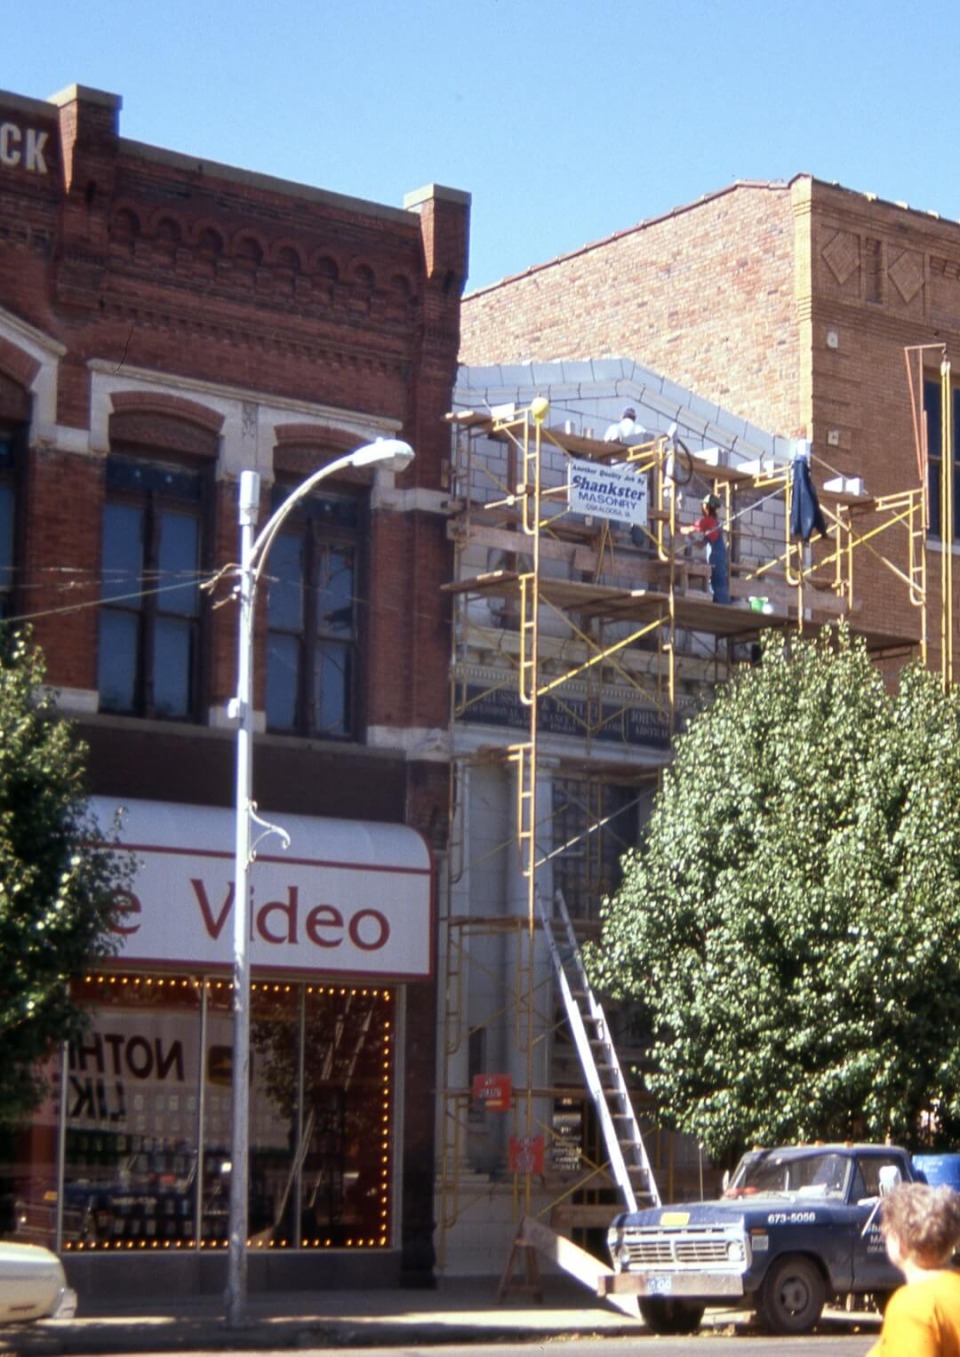 Construction on the Frankel Building in Oskaloosa, Iowa